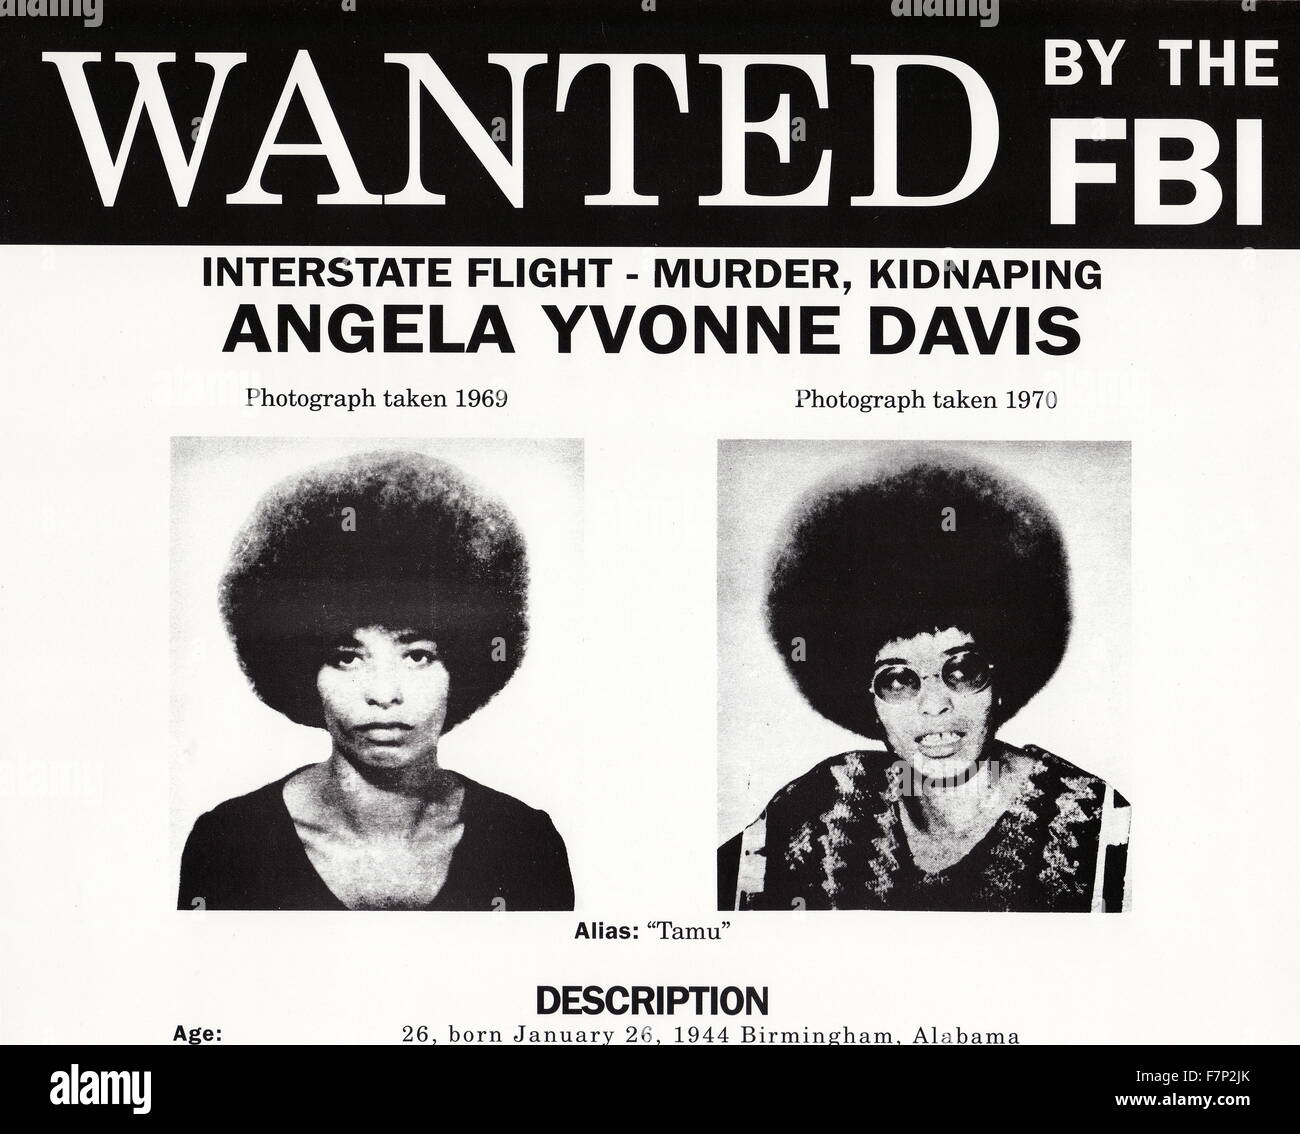 FBI Wanted poster for Angela Davis. Angela Yvonne Davis (born January 26, 1944) is an American political activist, scholar, and author. She emerged as a prominent counterculture activist and radical in the 1960s as a leader of the Communist Party USA, and had close relations with the Black Panther Party through her involvement in the Civil Rights Movement, although she was never a party member. Stock Photo